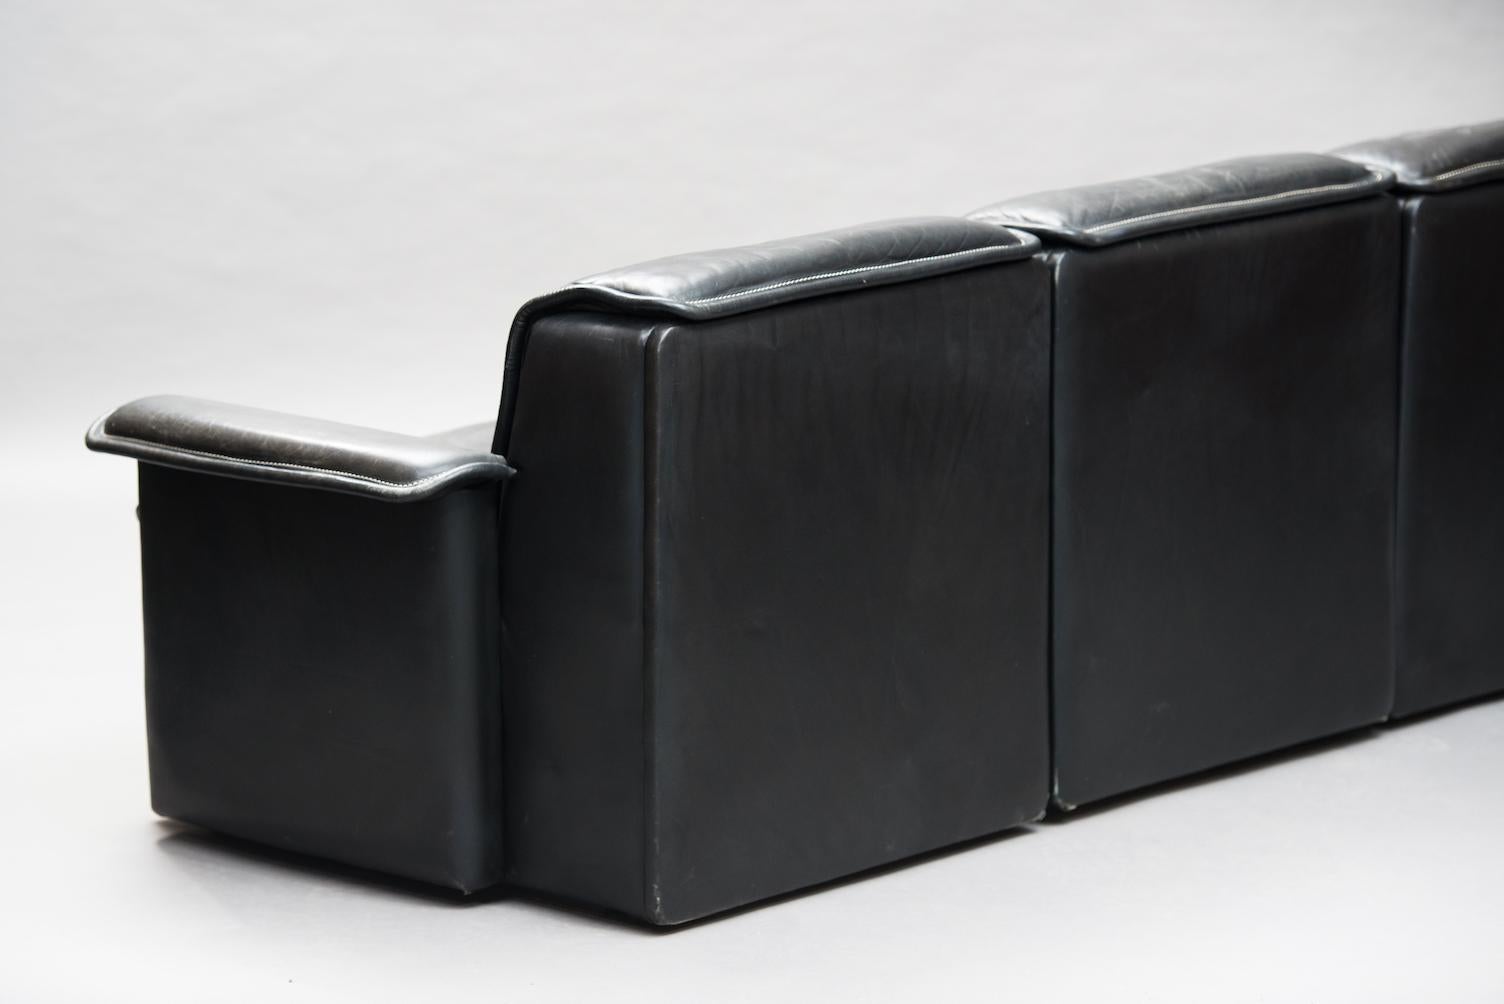 DS 12 three-seat modular sofa in black buffalo leather from the 1970s by De Sede, Switzerland.